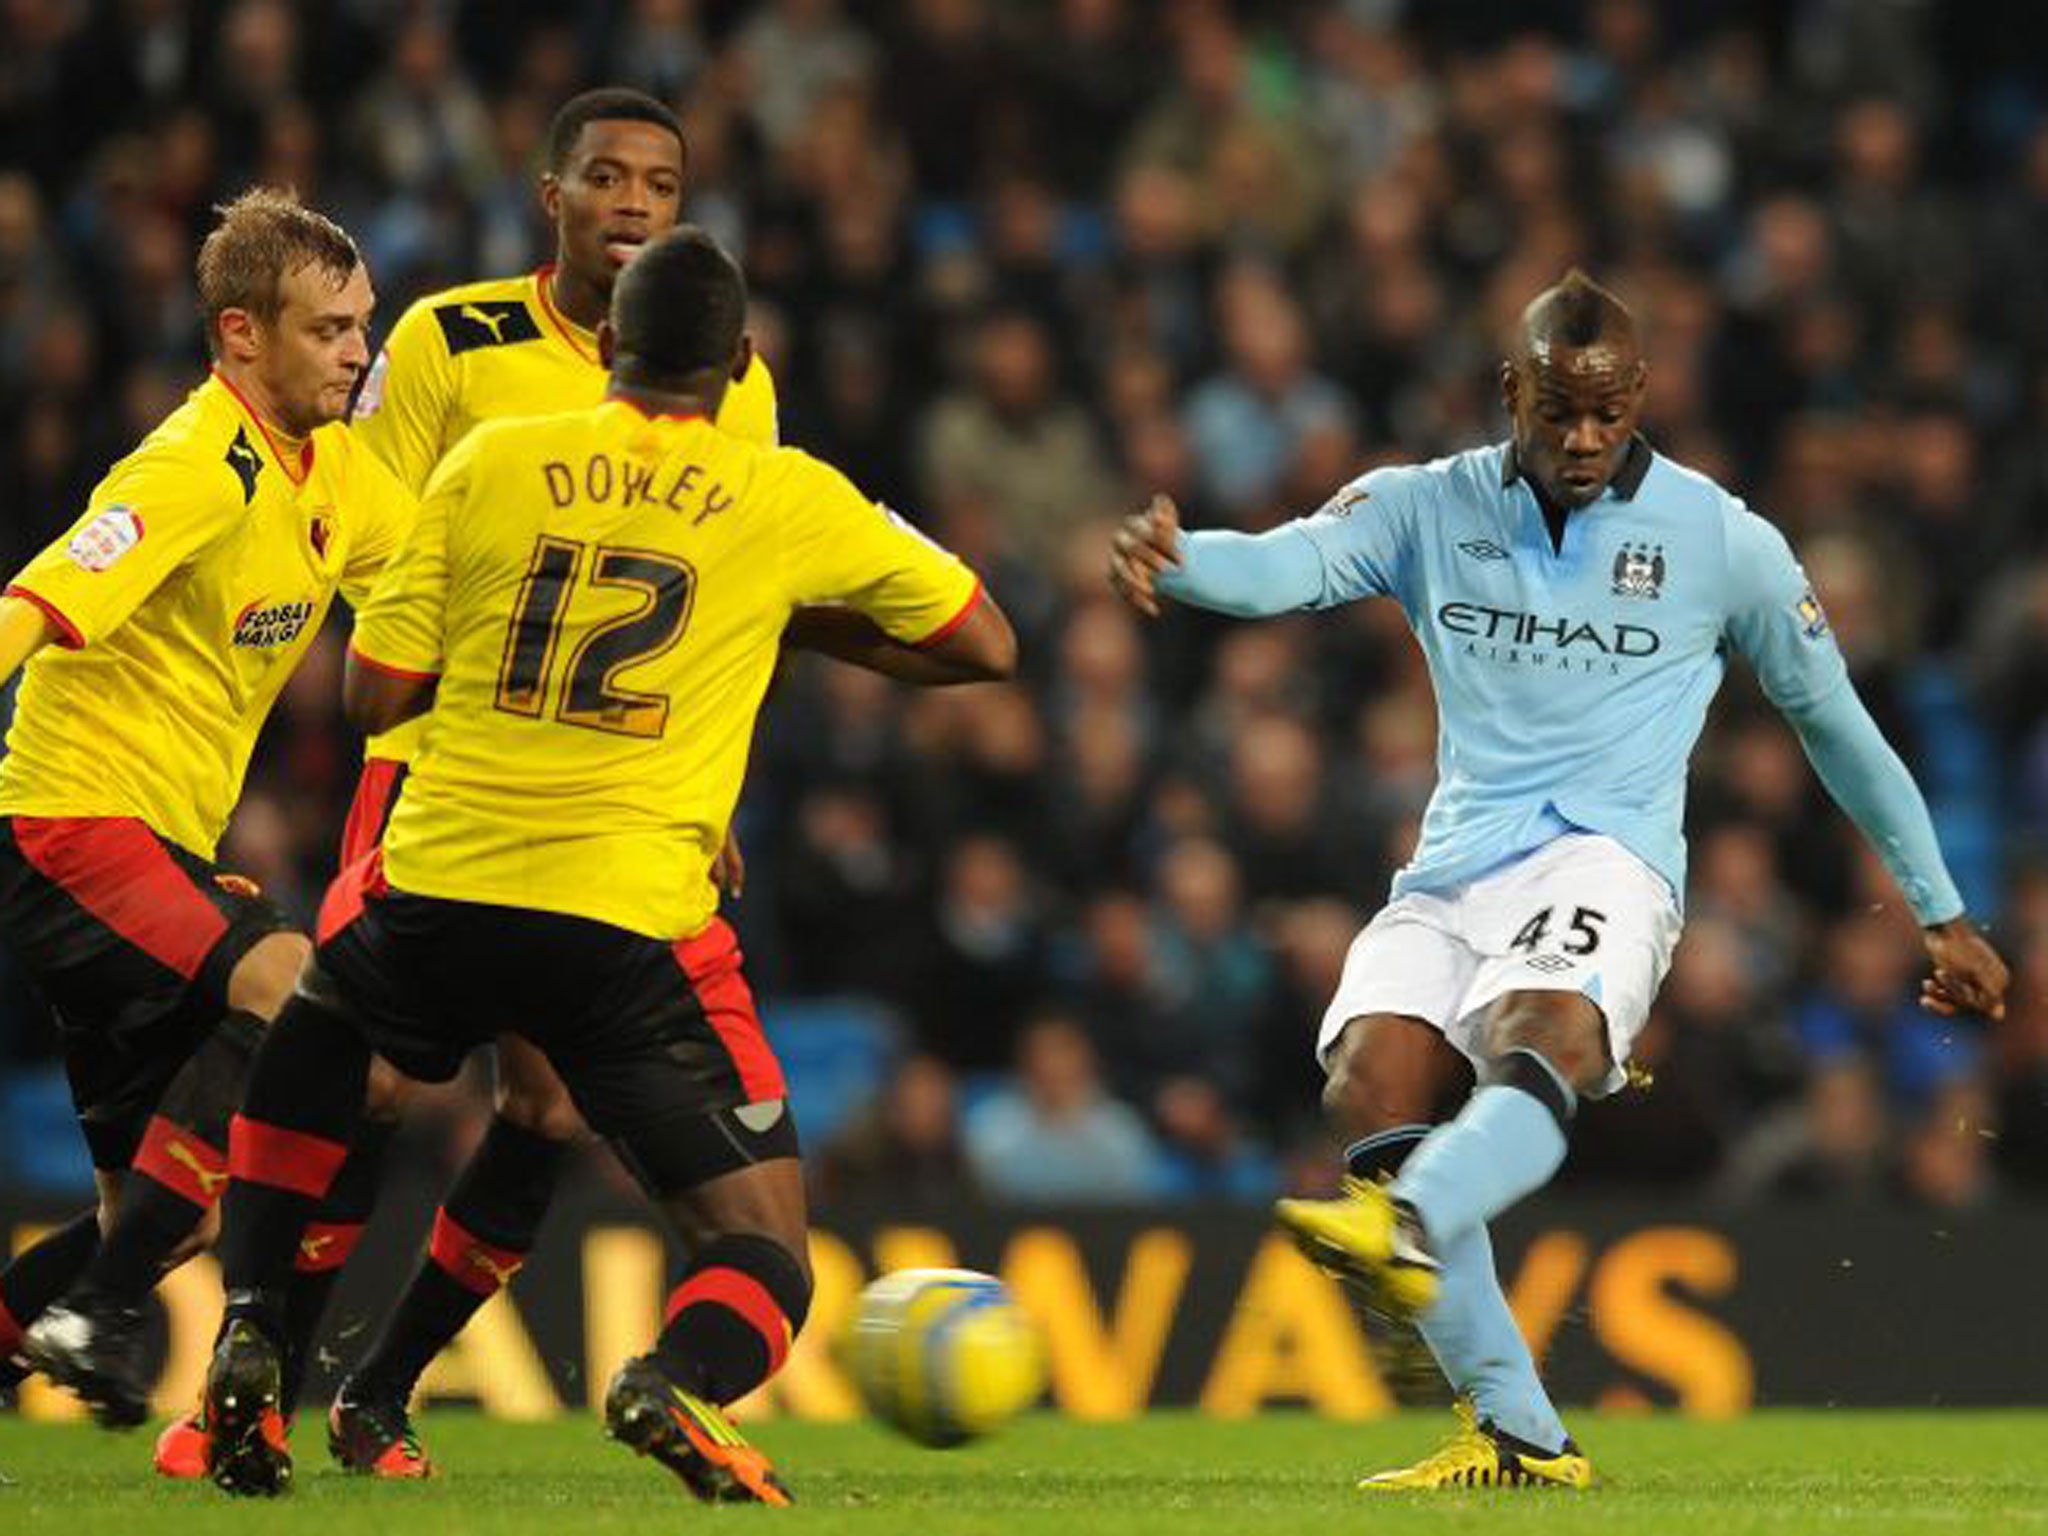 Mario Balotelli fires in a shot after coming on as a substitute on Saturday